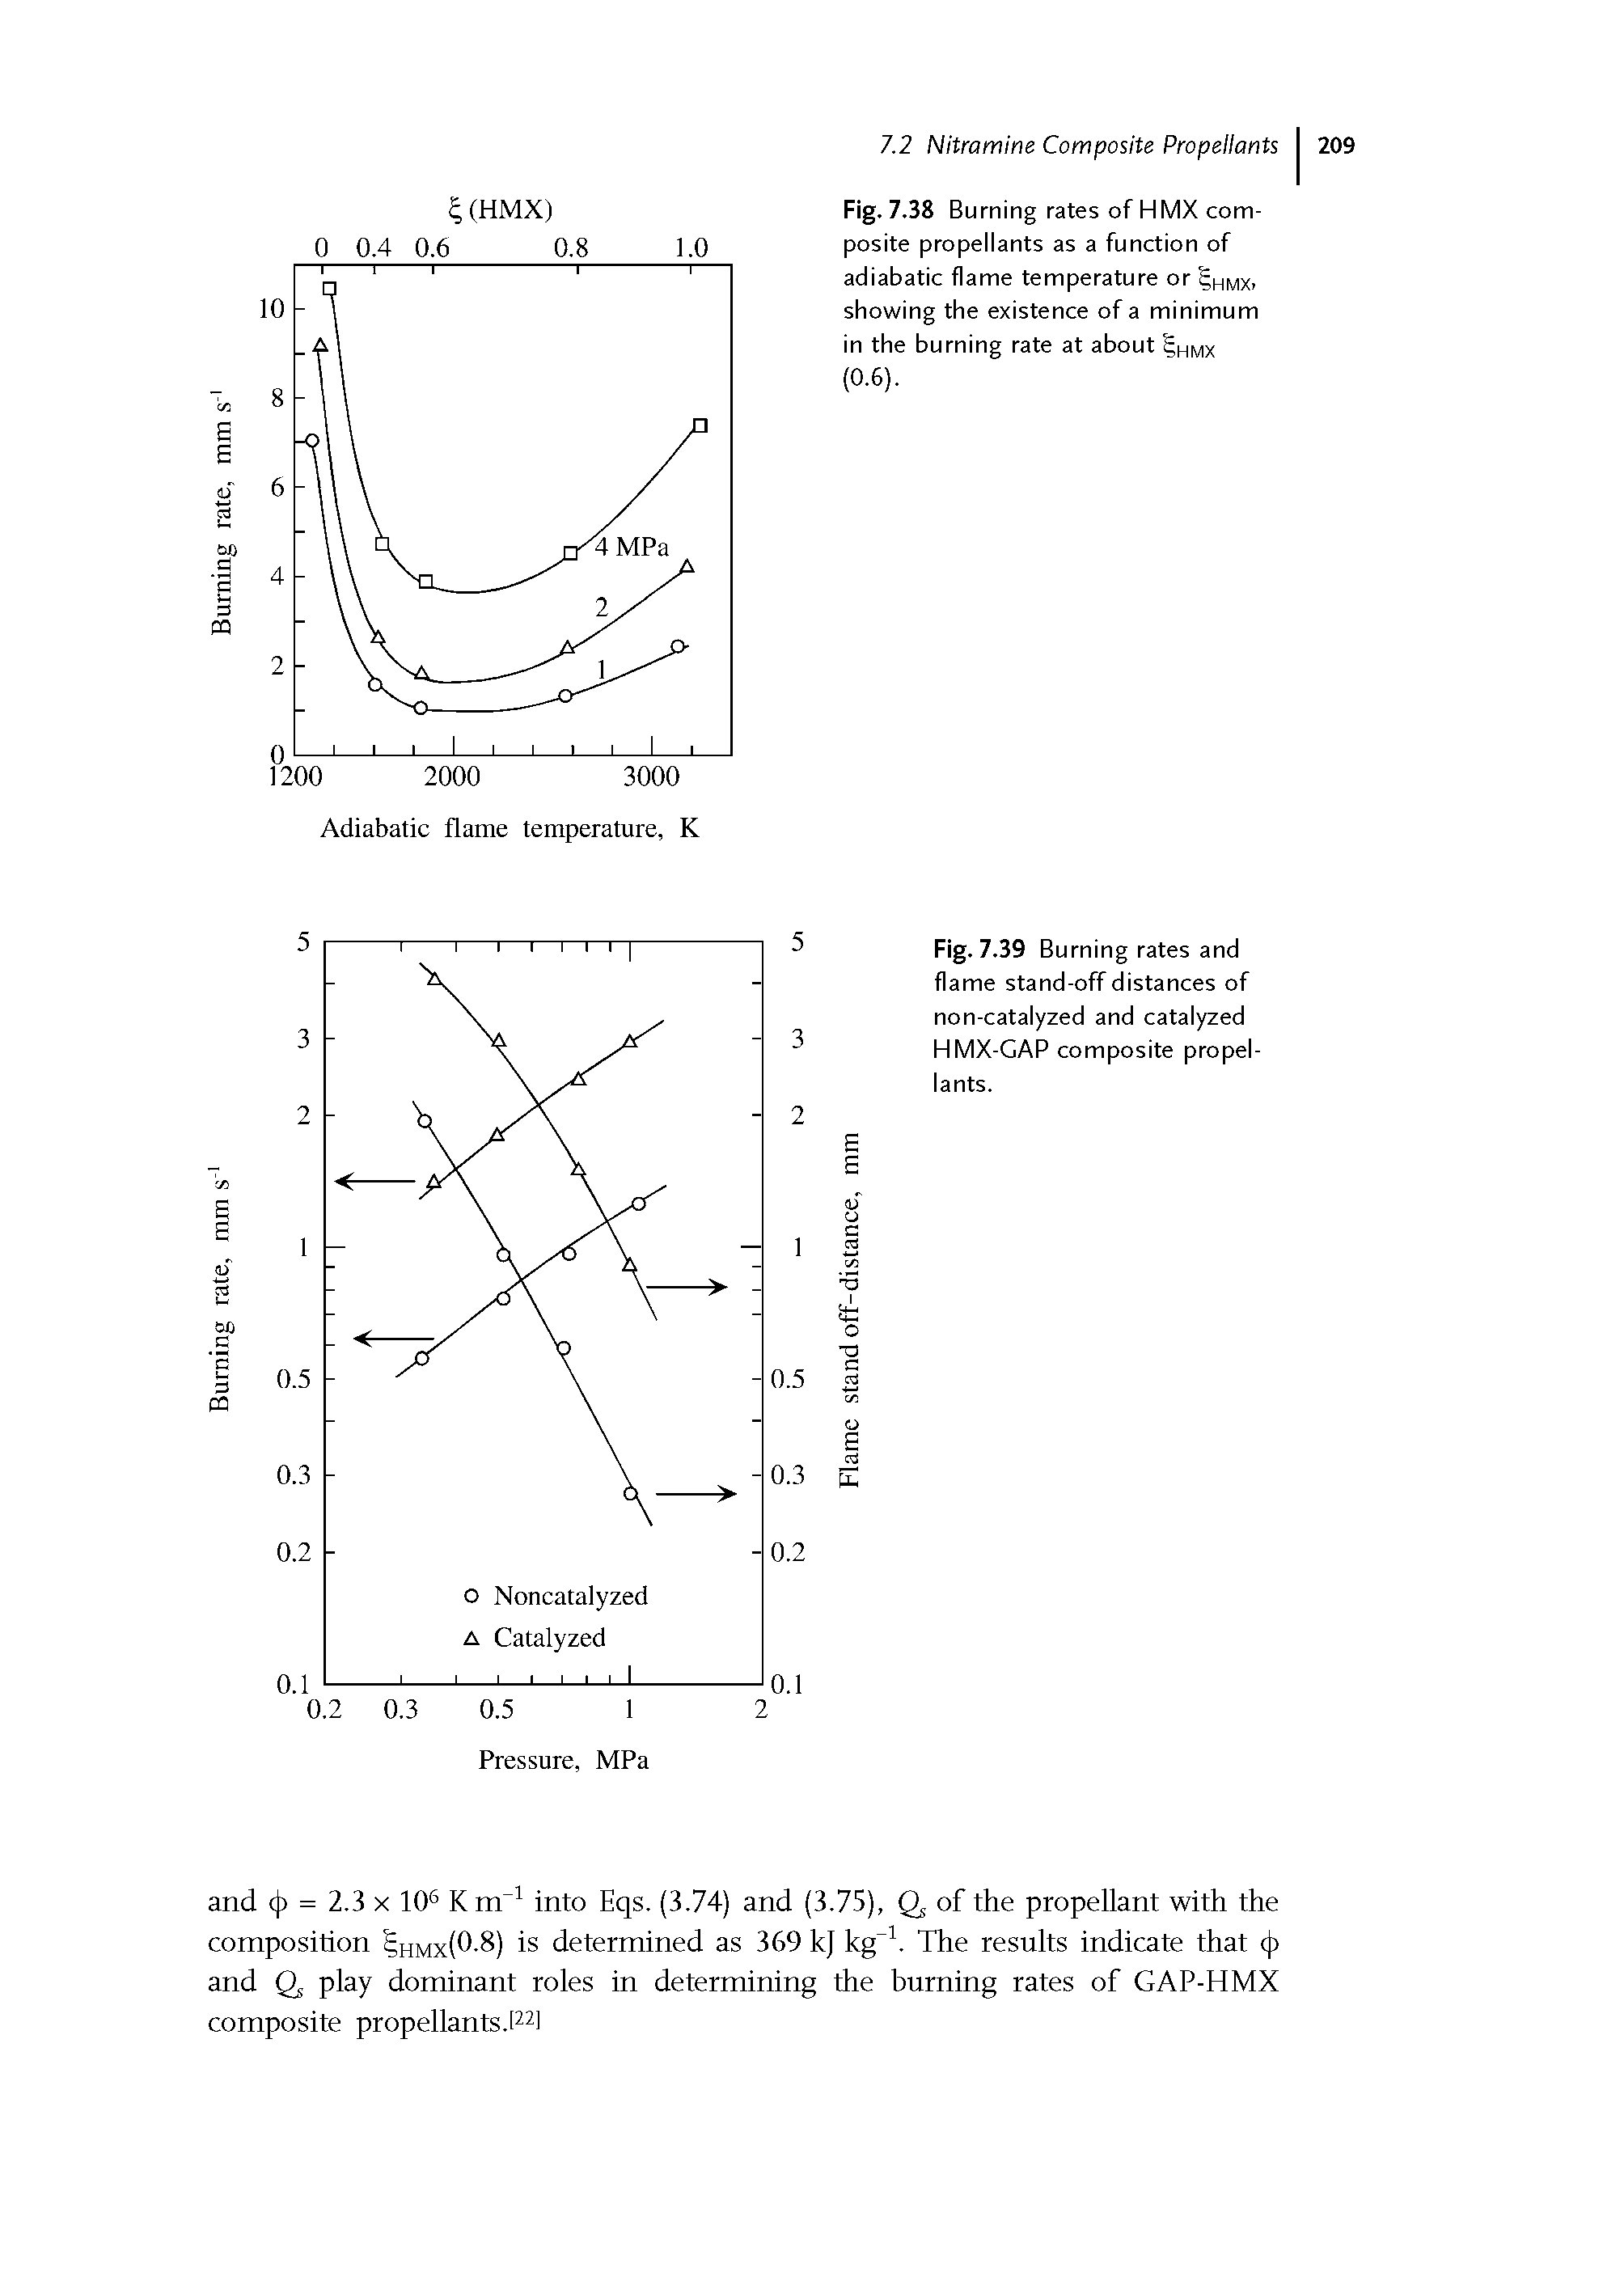 Fig. 7.38 Burning rates of HMX composite propellants as a function of adiabatic flame temperature or hmx showing the existence of a minimum in the burning rate at about hmx (0.6).